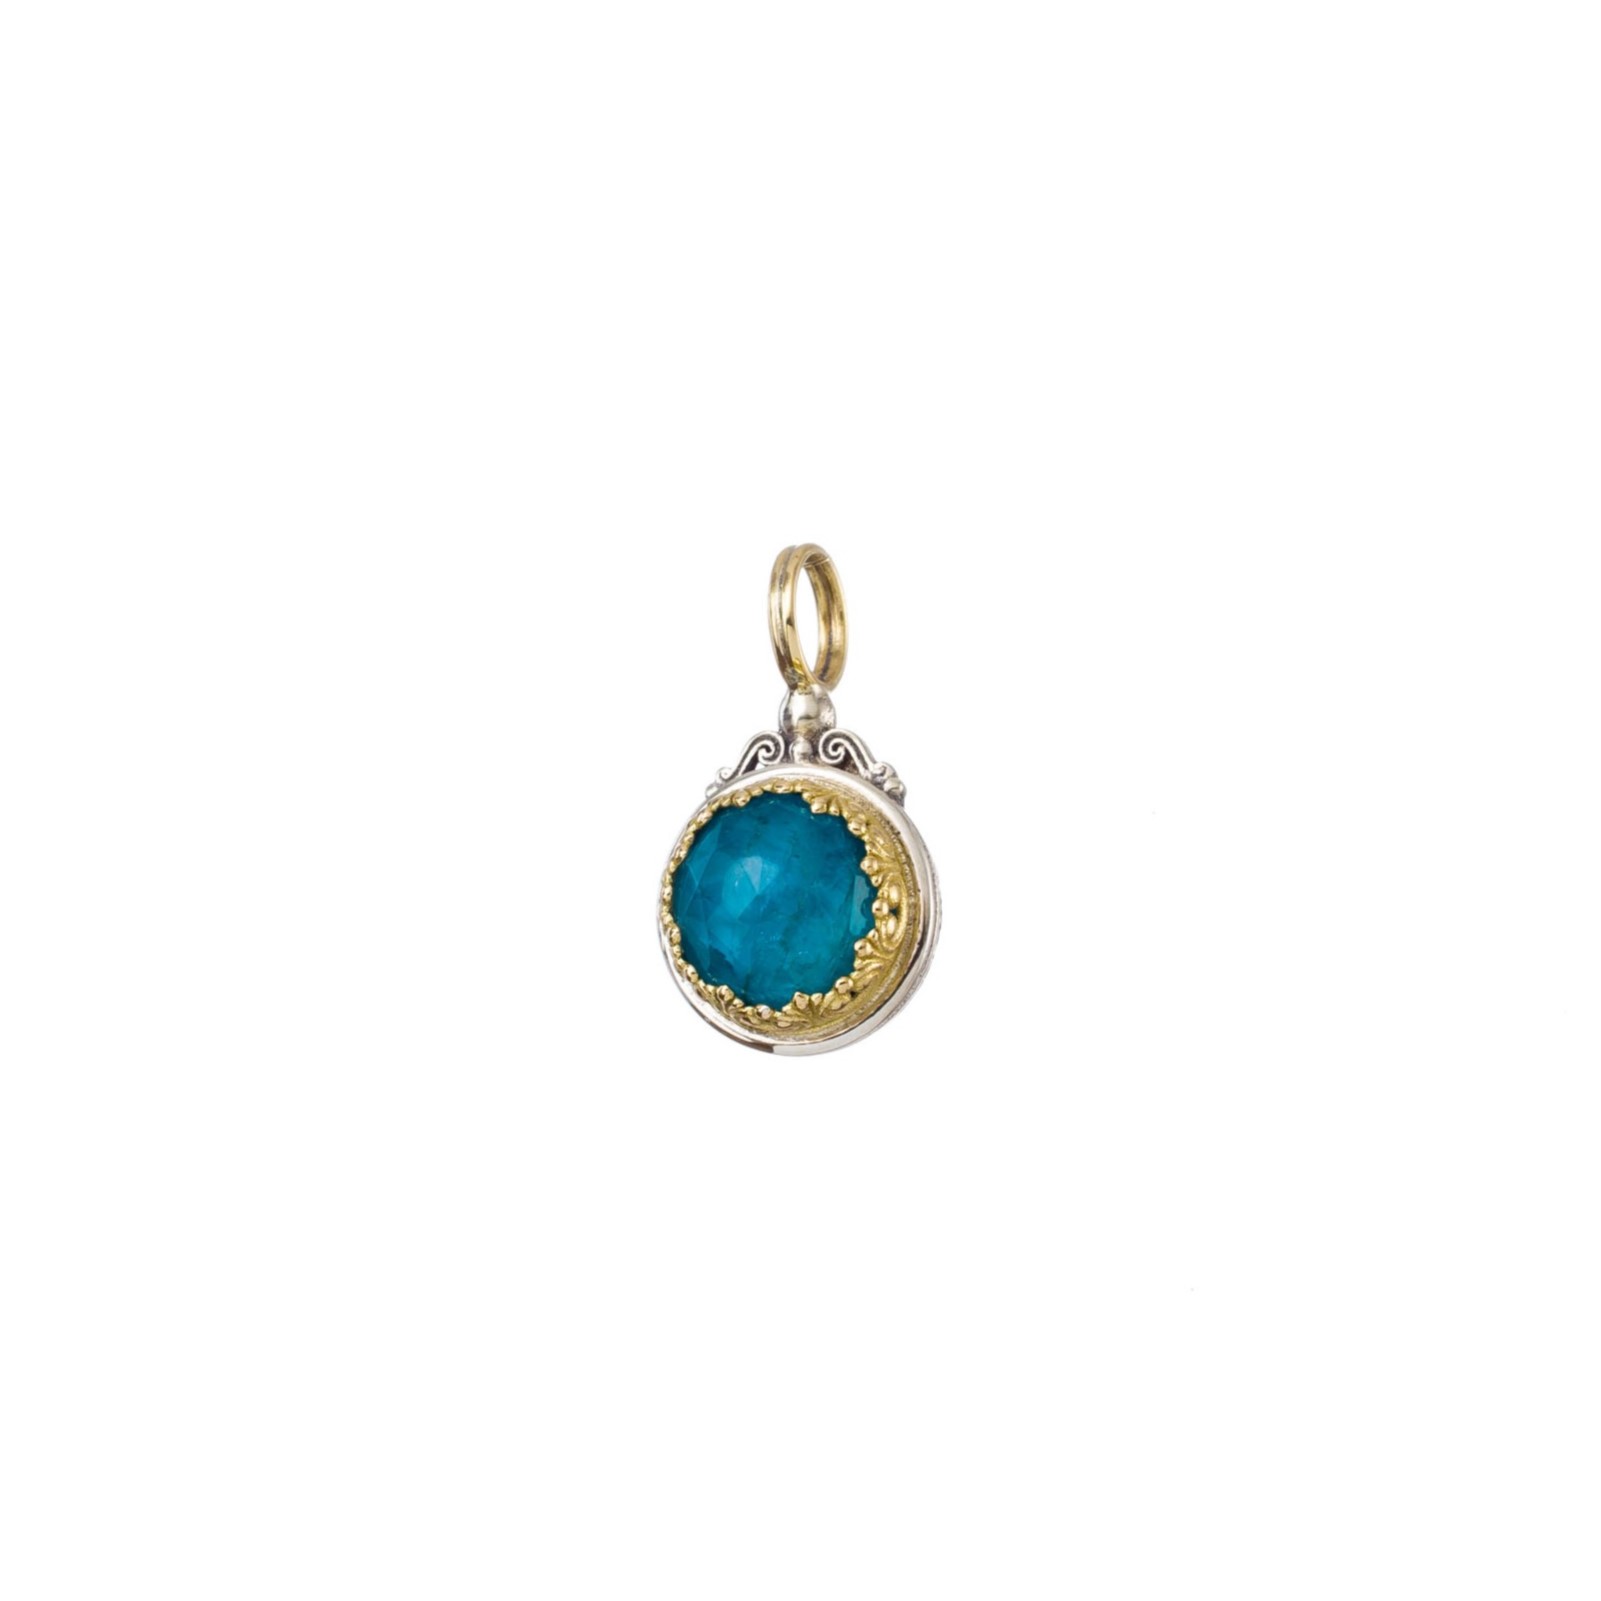 Iris medium round pendant in 18K Gold and sterling silver with doublet stone